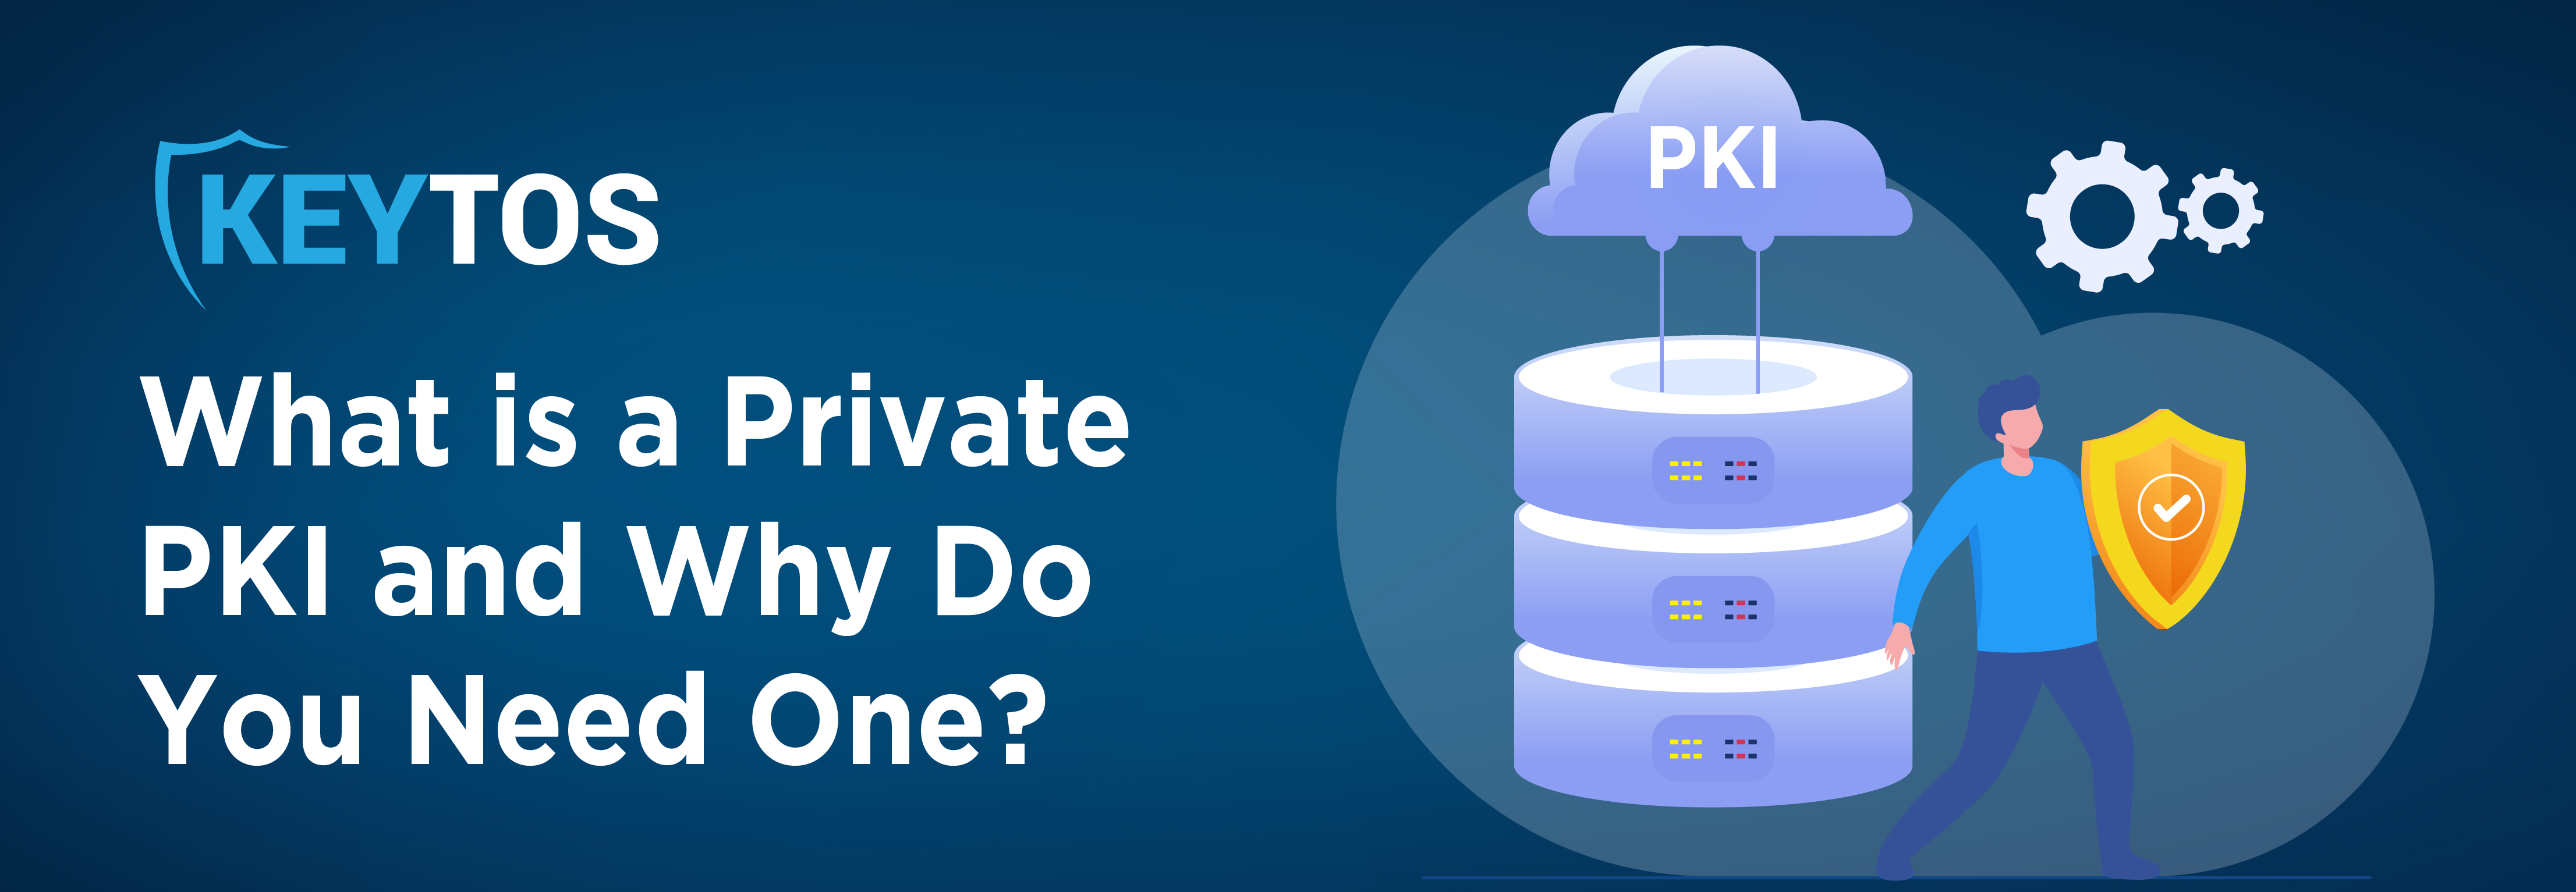 What is a Private PKI? Why do you need a Private PKI? Private PKI Explained.